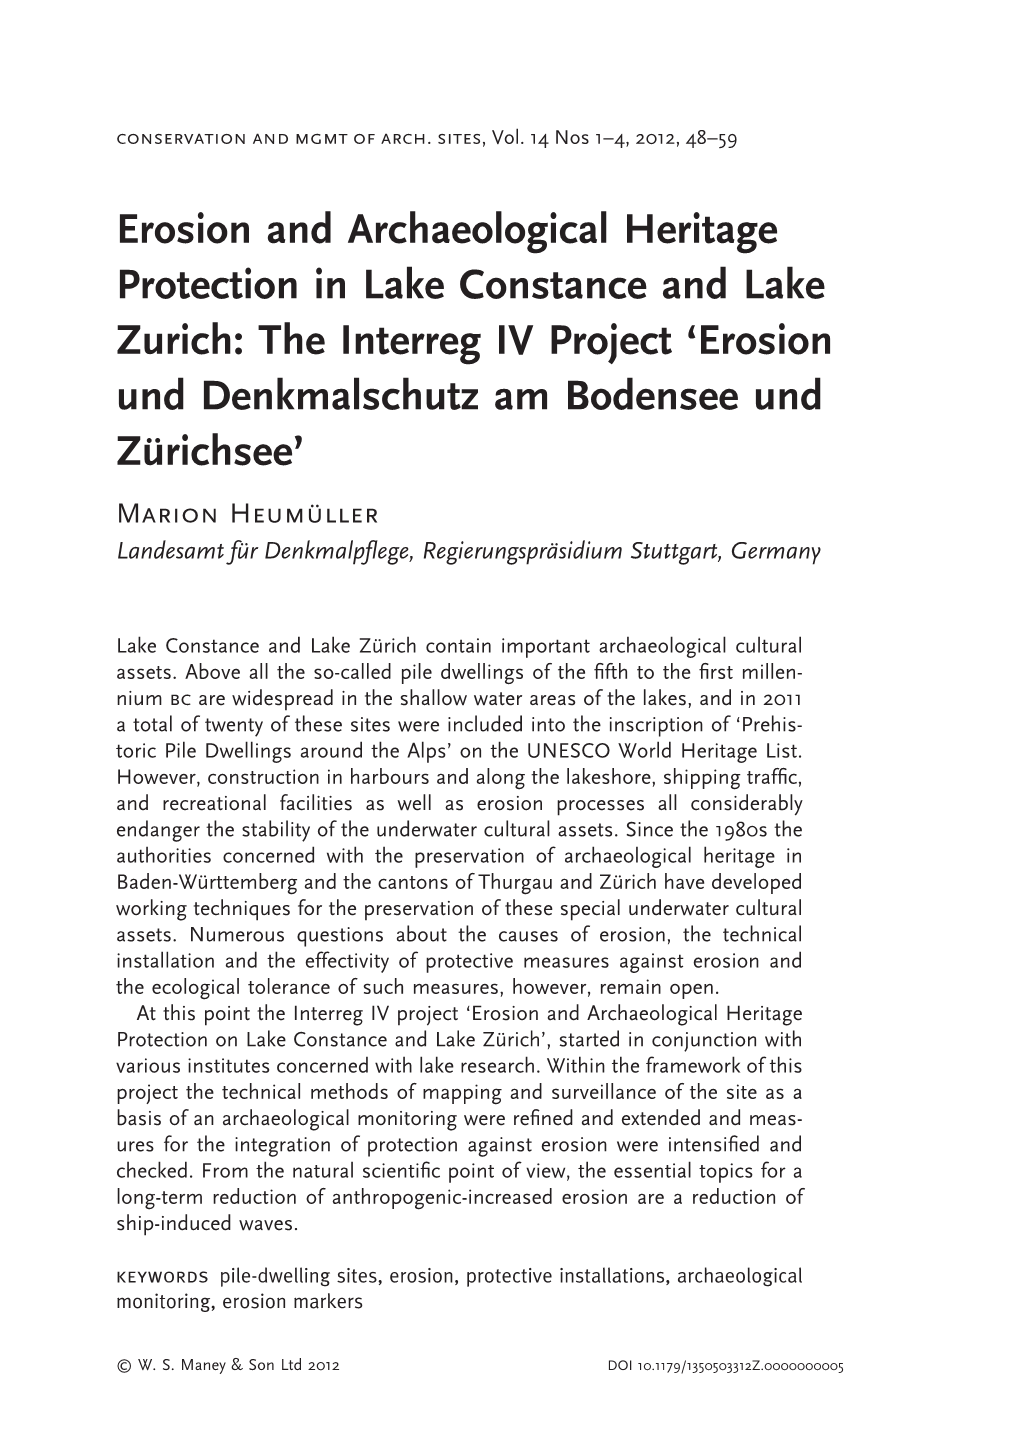 Erosion and Archaeological Heritage Protection in Lake Constance And